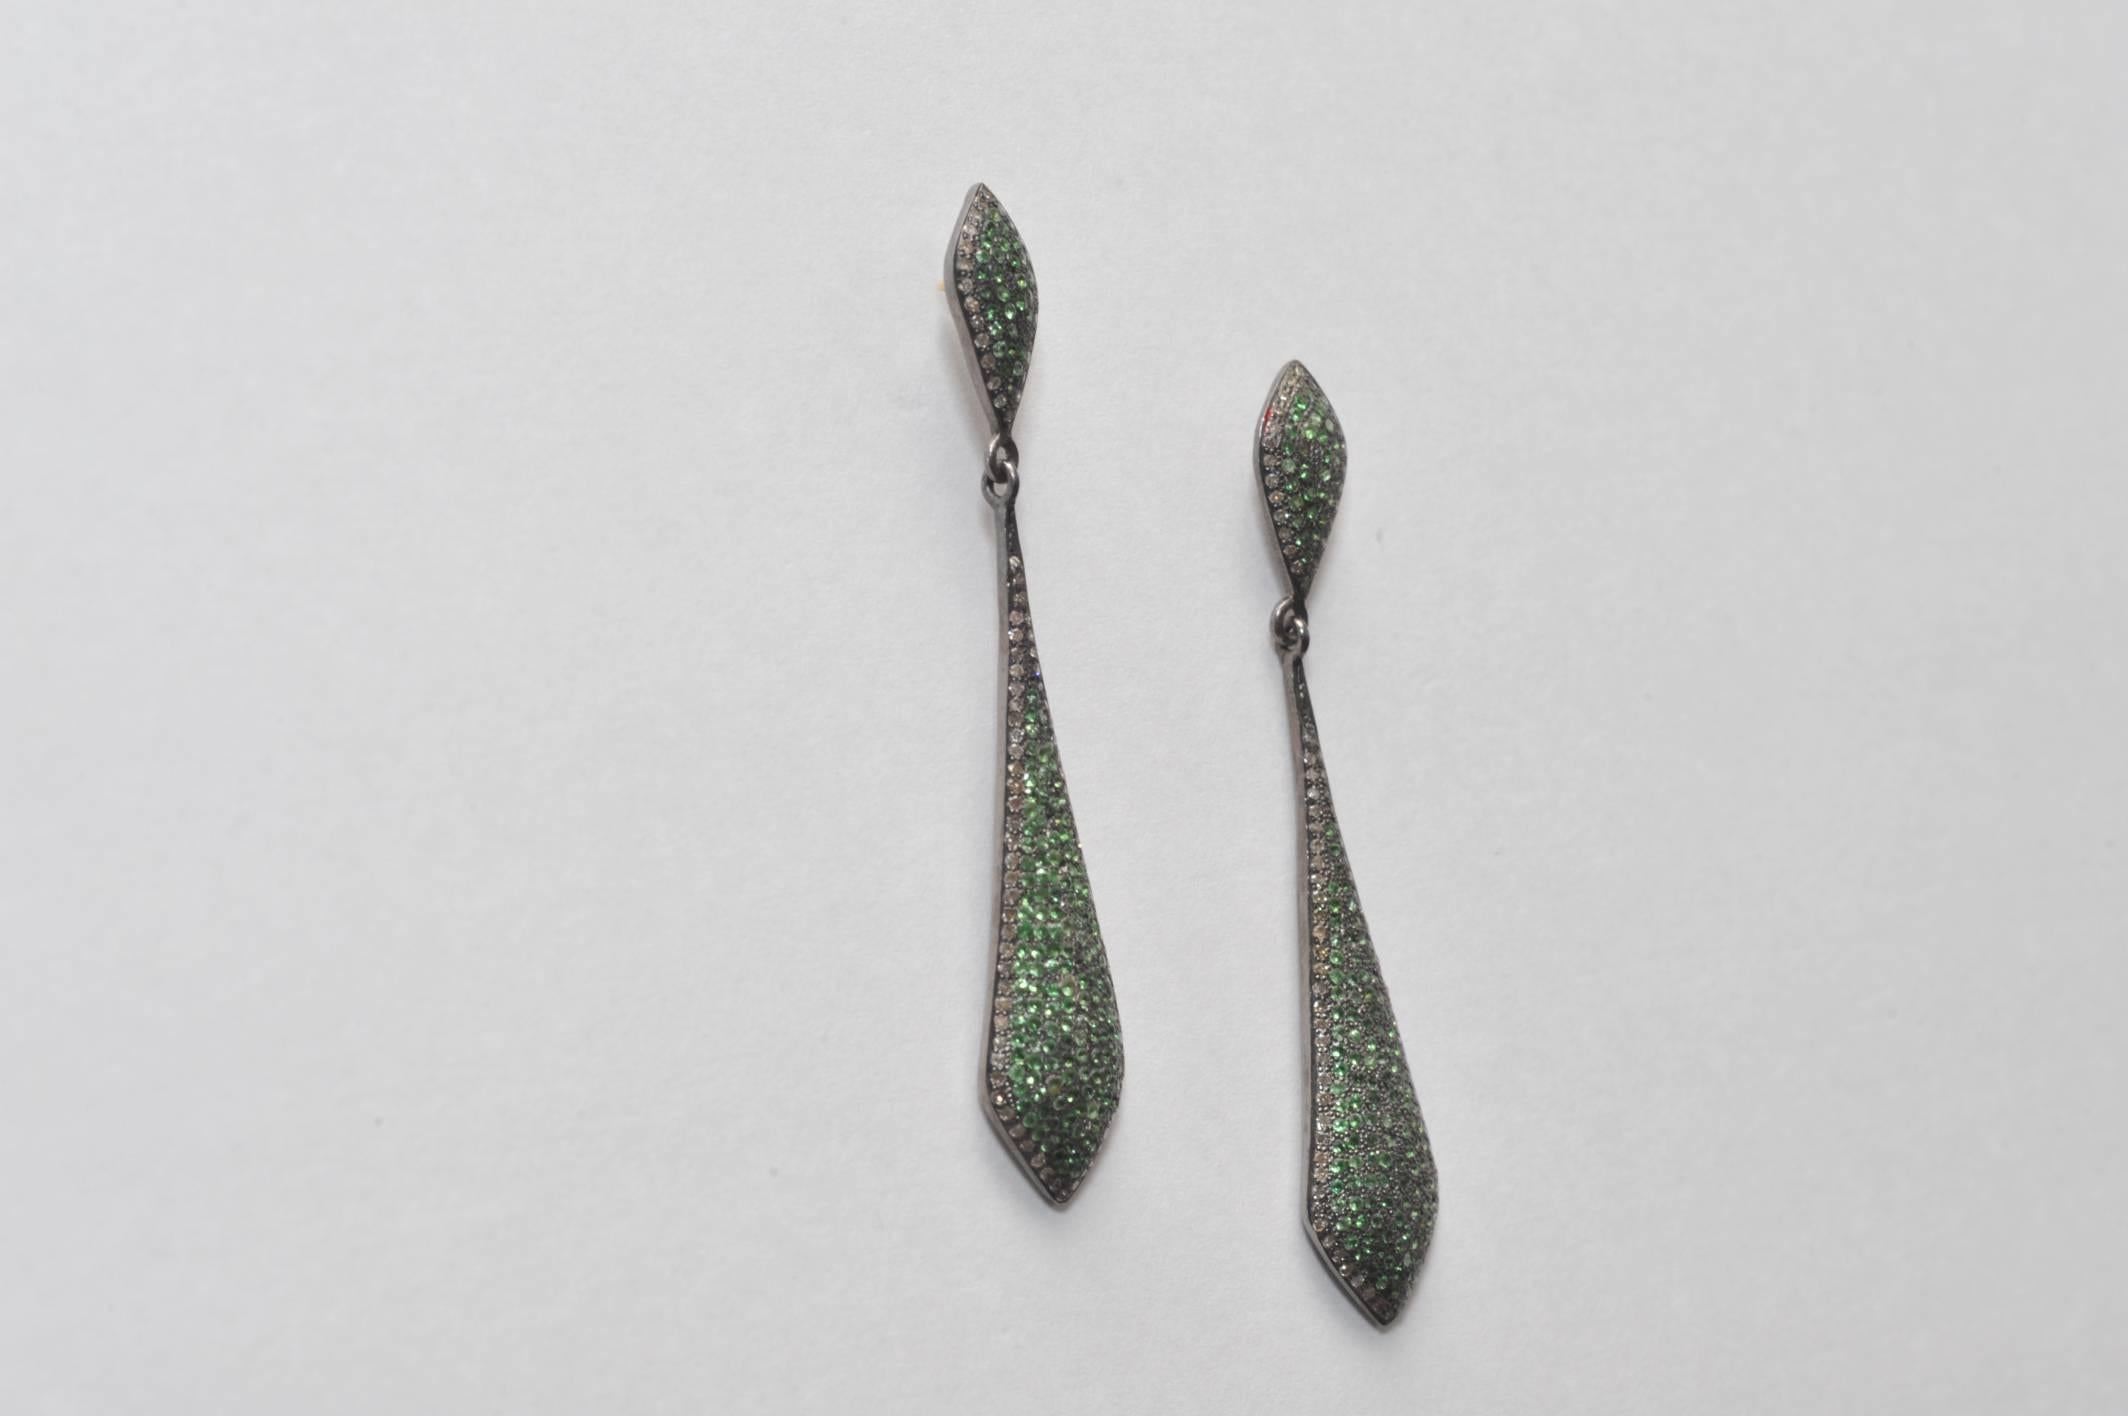 Pair of pave`-set tsavorite stone earrings bordered with diamonds, set in oxidized sterling with 18K gold post for pierced ears.  Carat weight is 1.88; the diamond weight is .72.